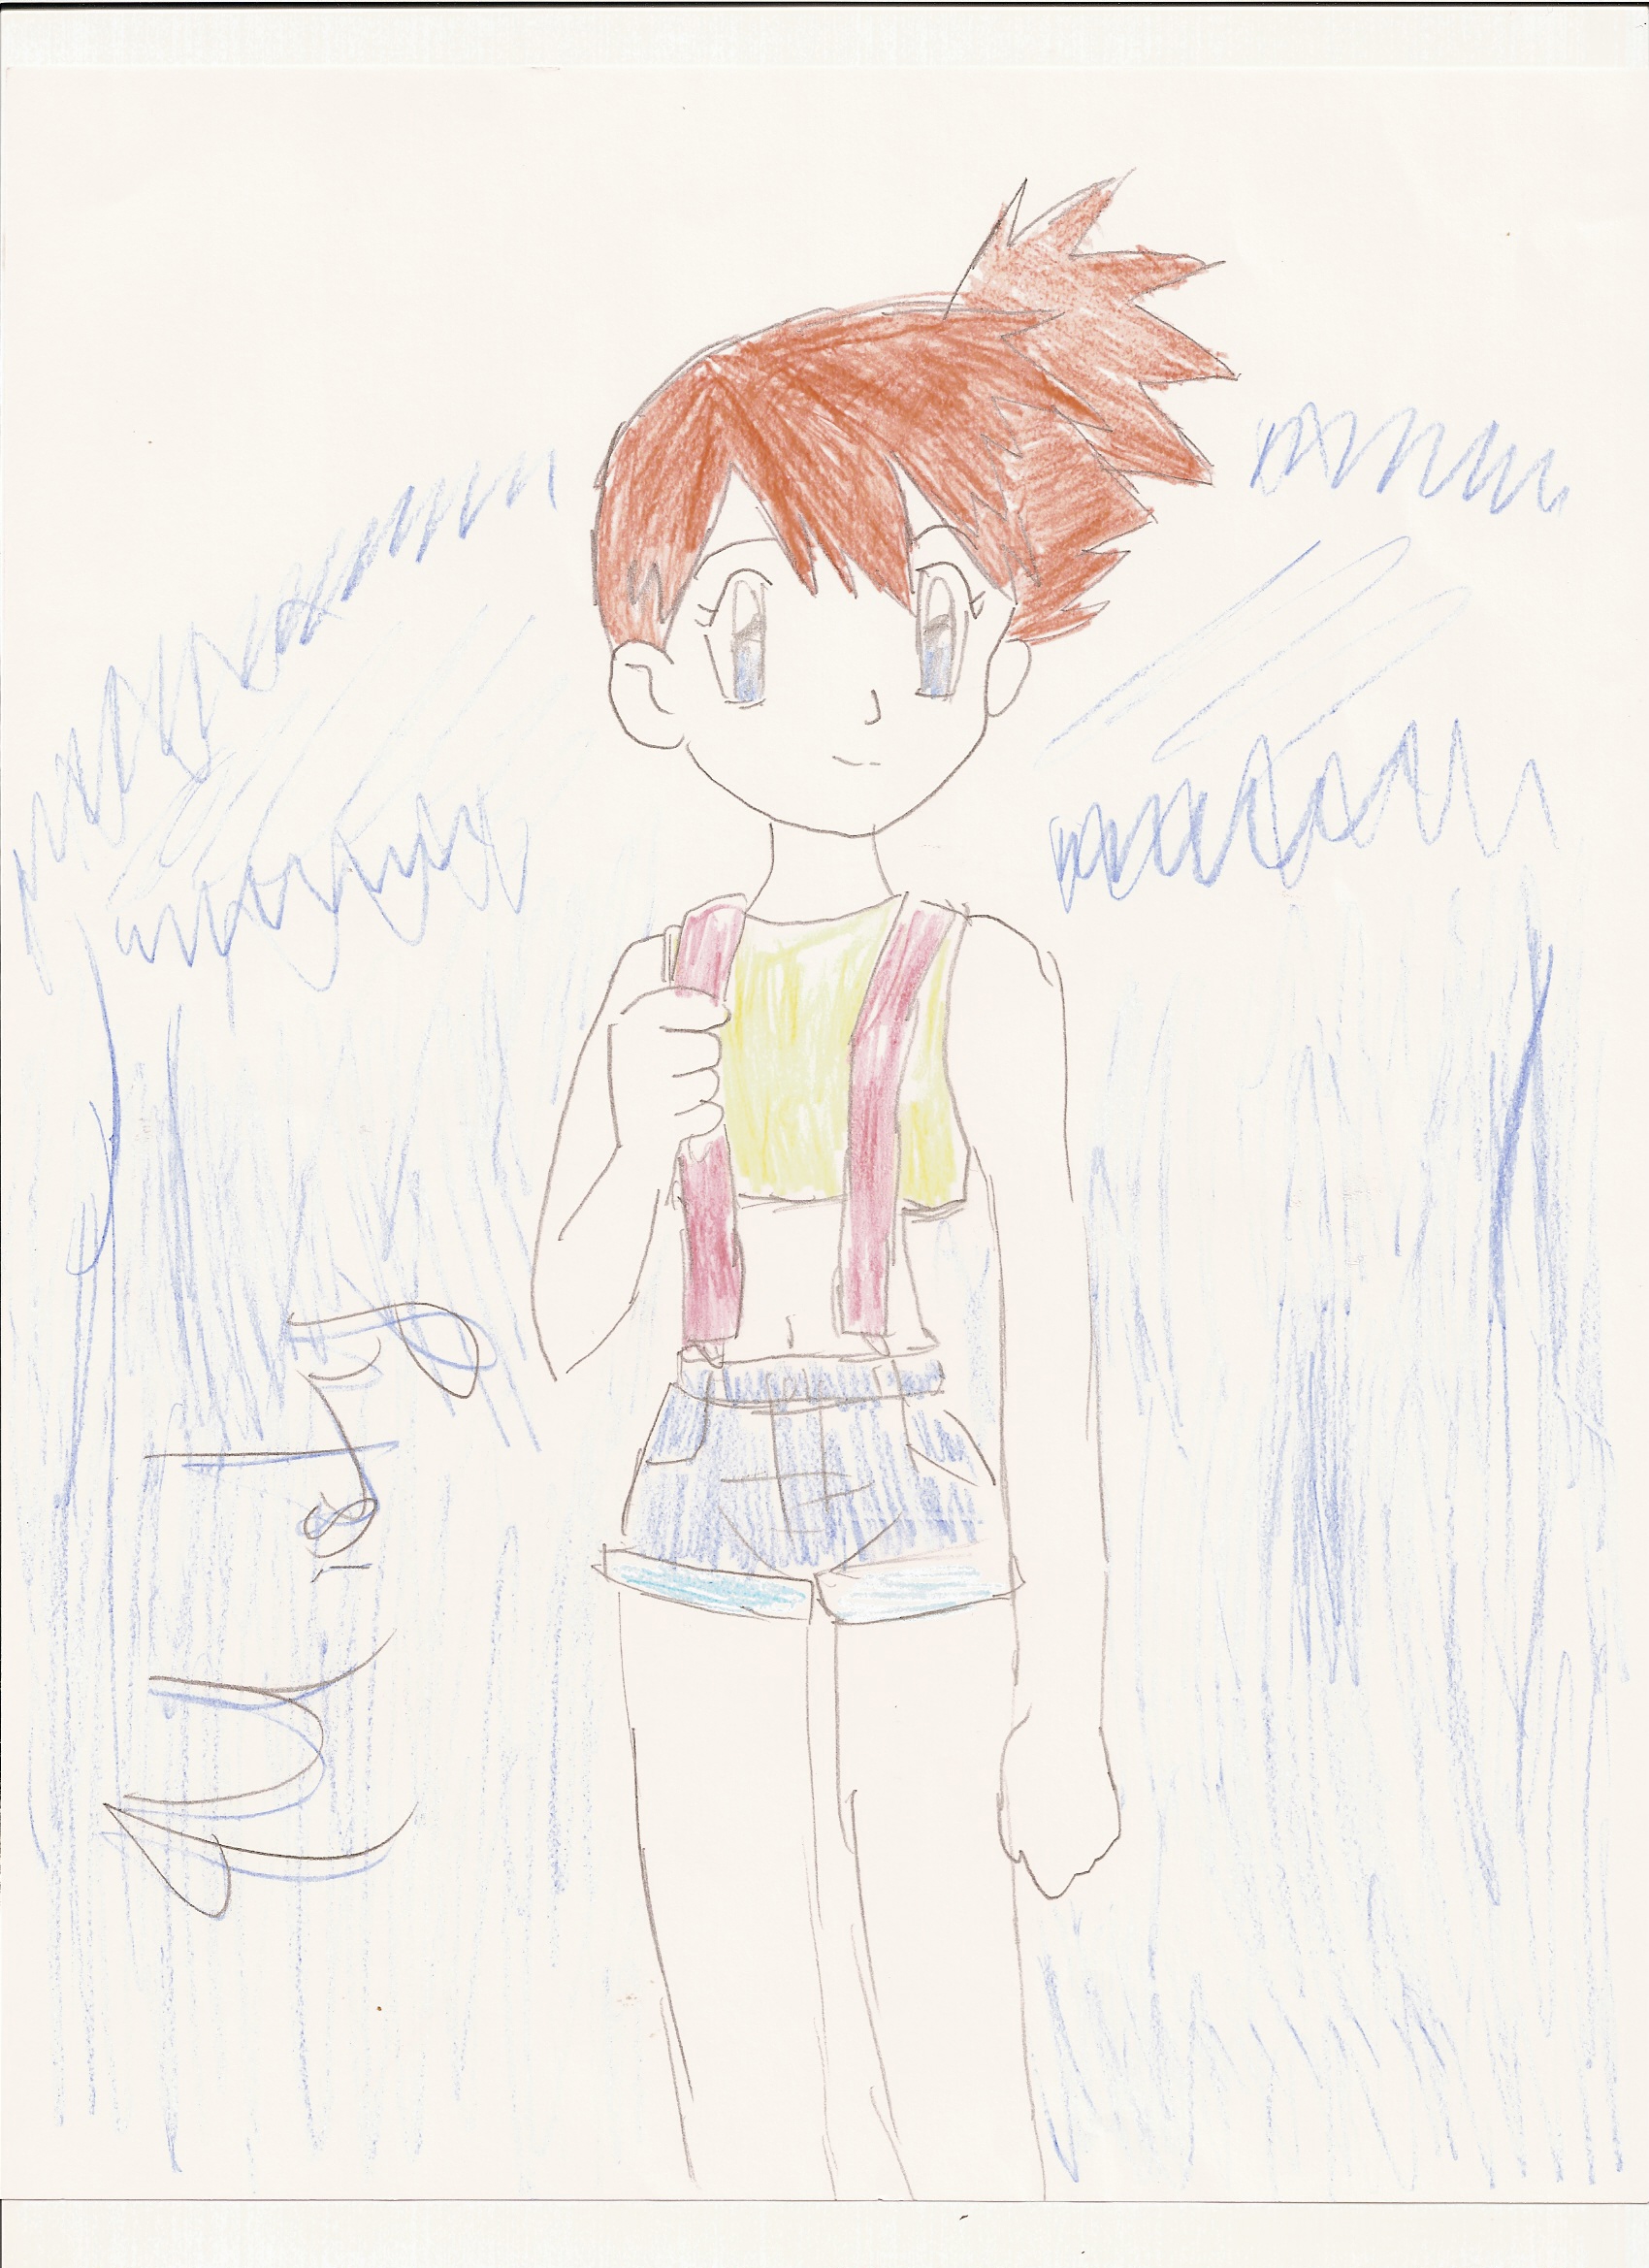 My first time drawing Misty by Kimikoprincesspancho